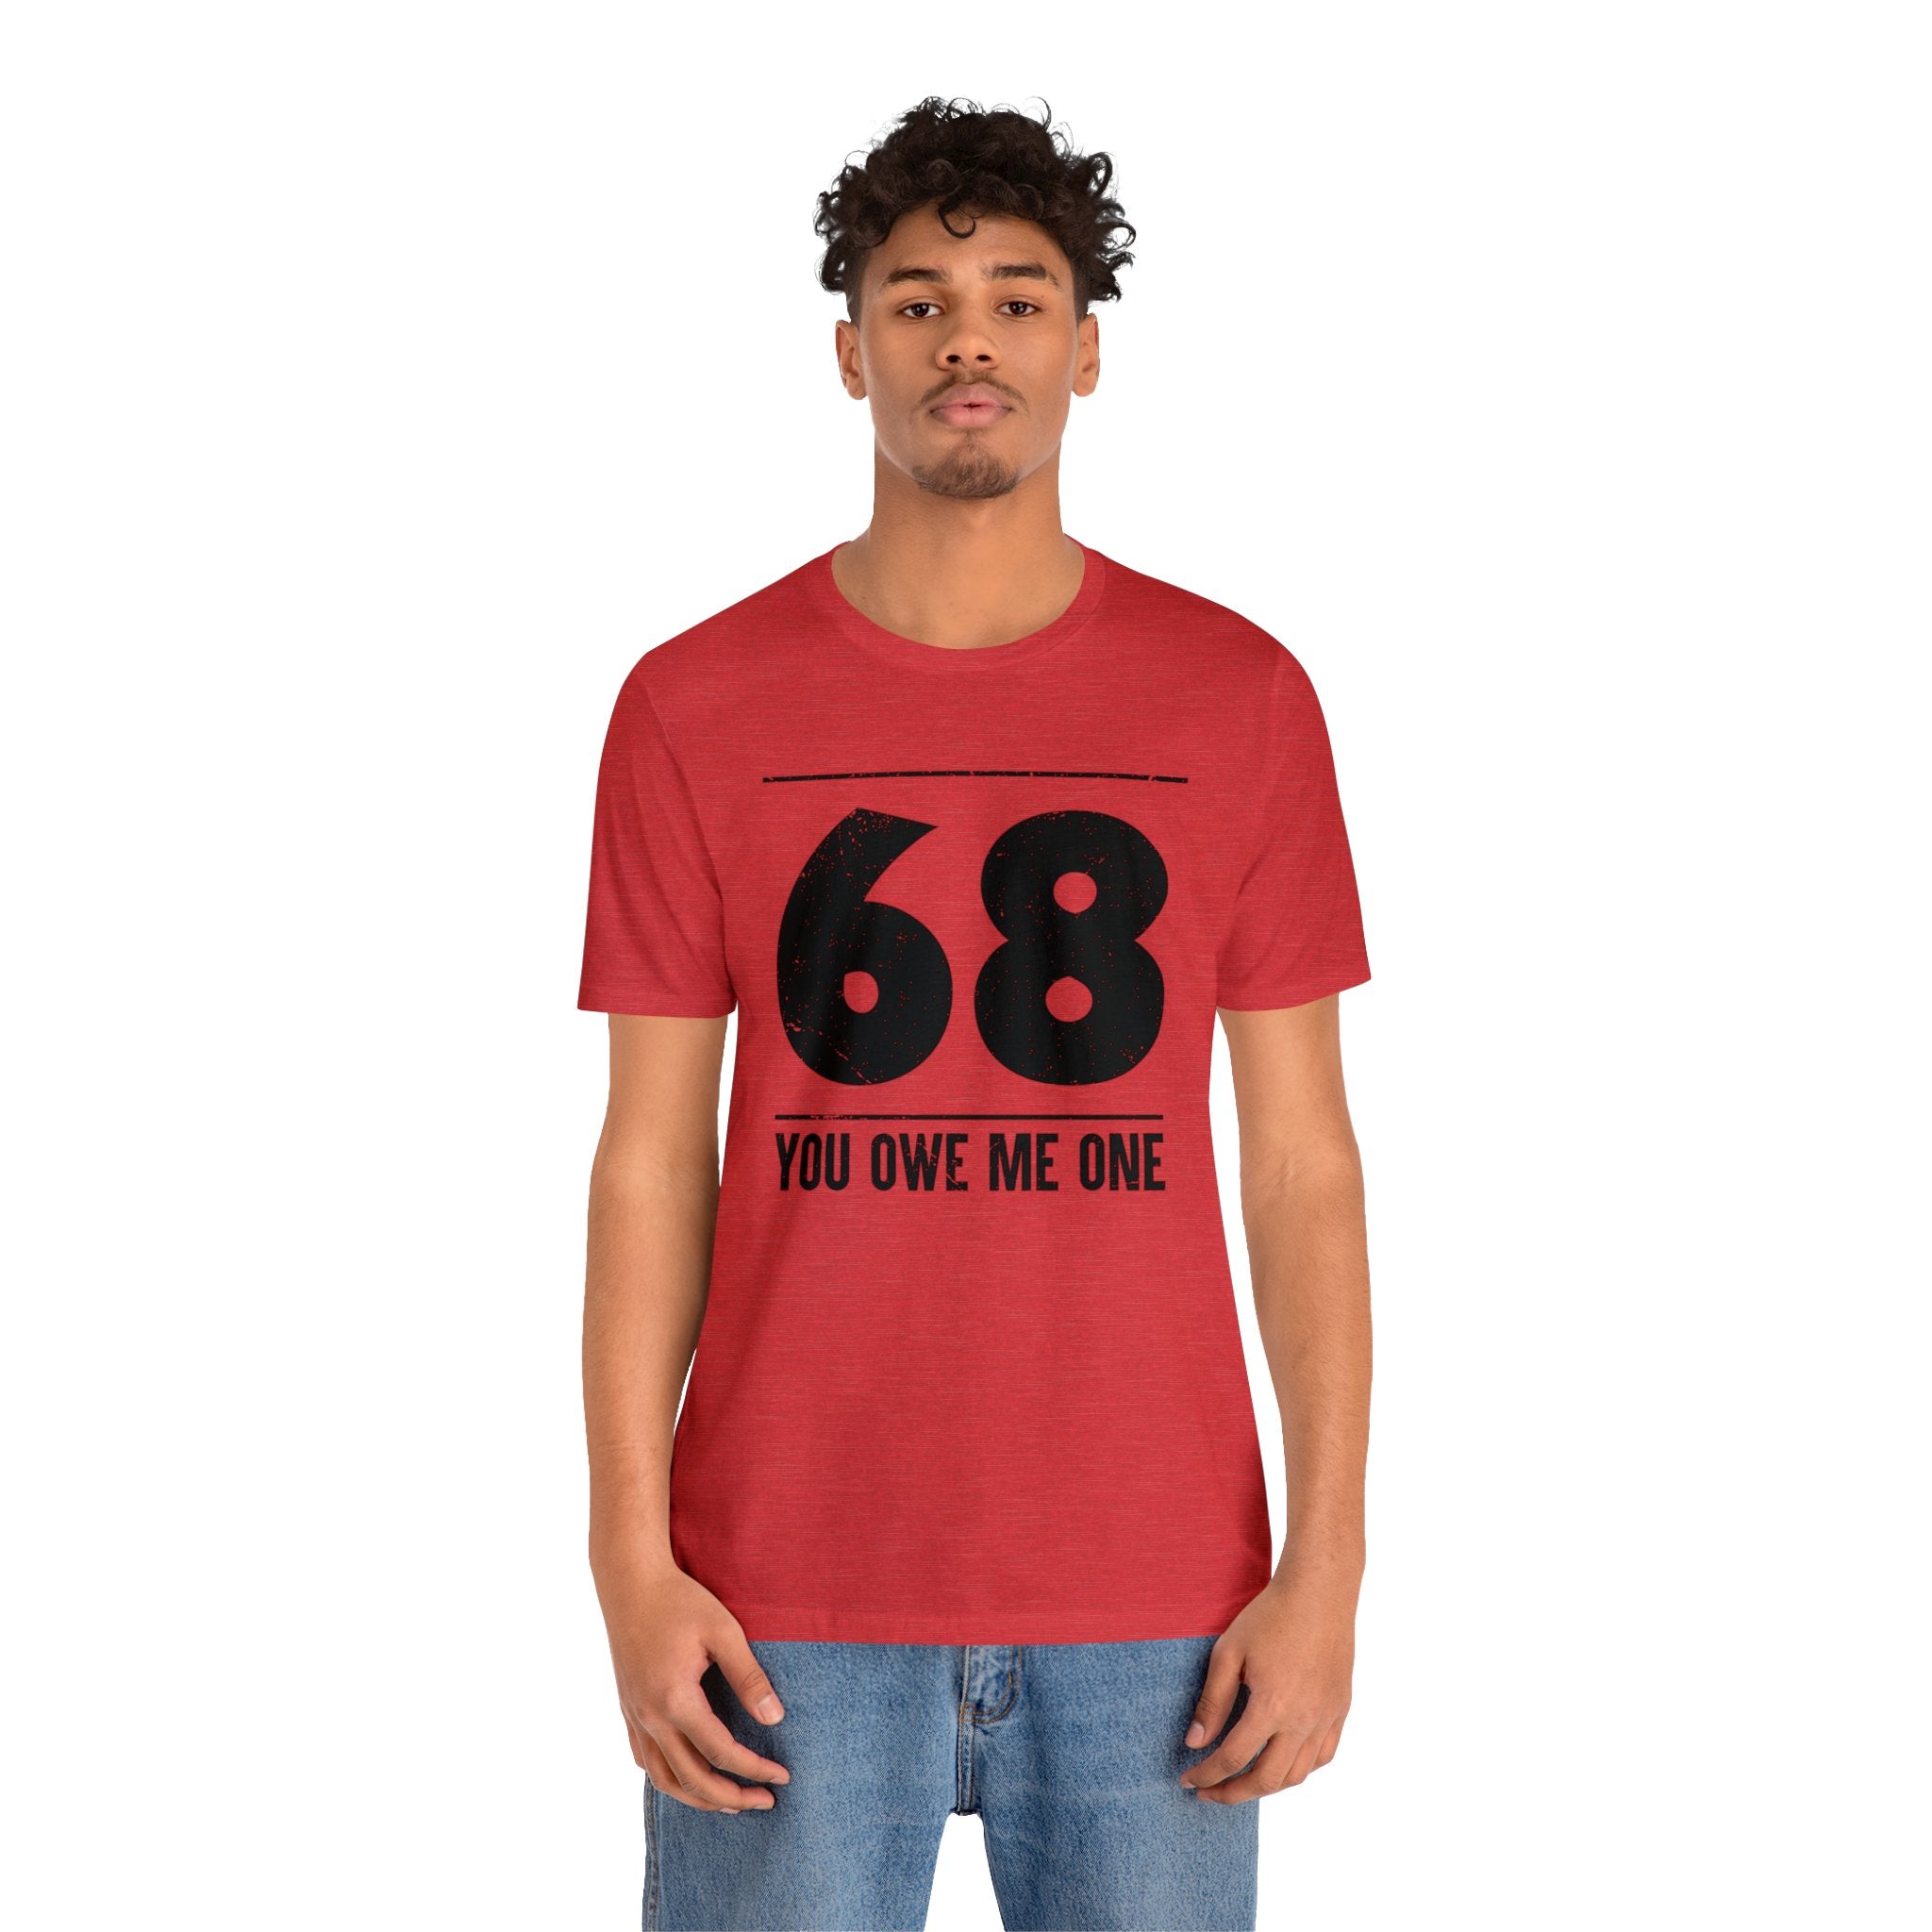 A man wearing a geeky red shirt with the number 68 You Owe Me One on it at an awesome deal.